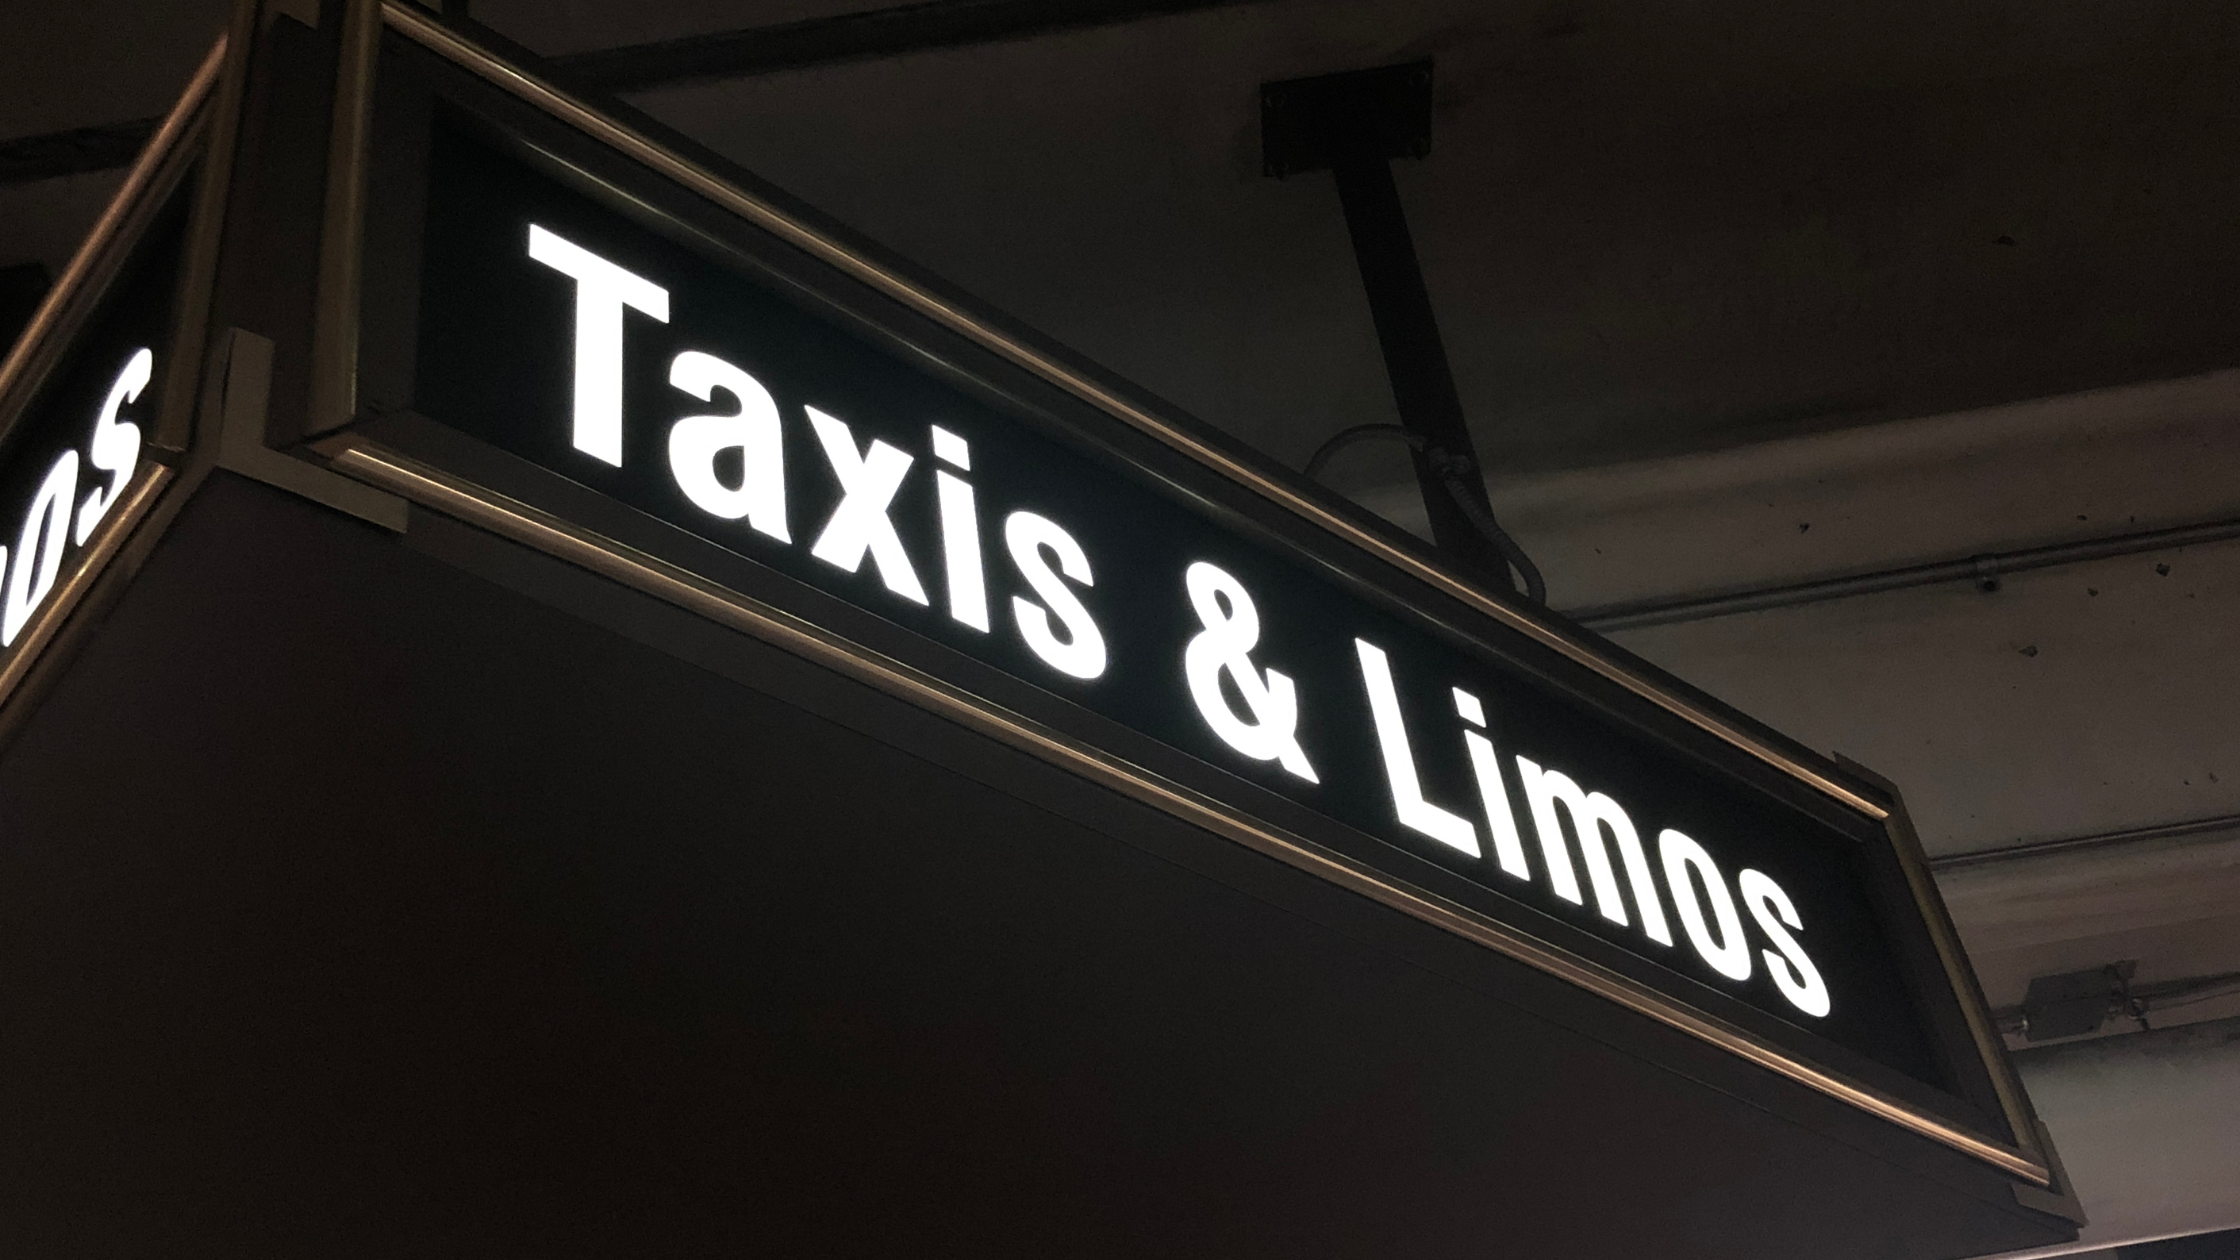 taxis & limos